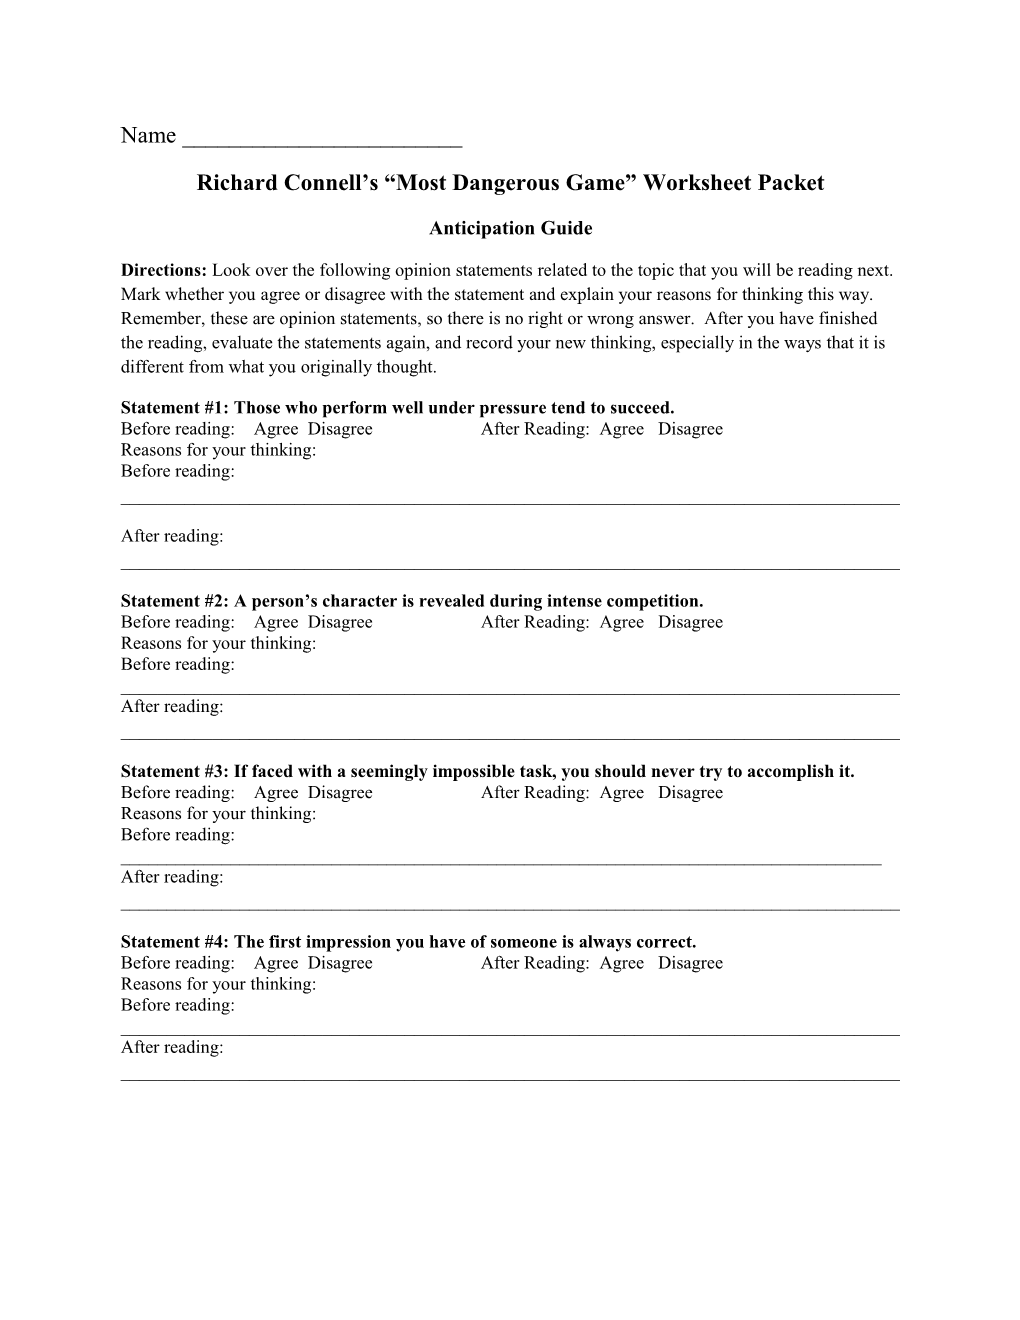 Richard Connell S Most Dangerous Game Worksheet Packet